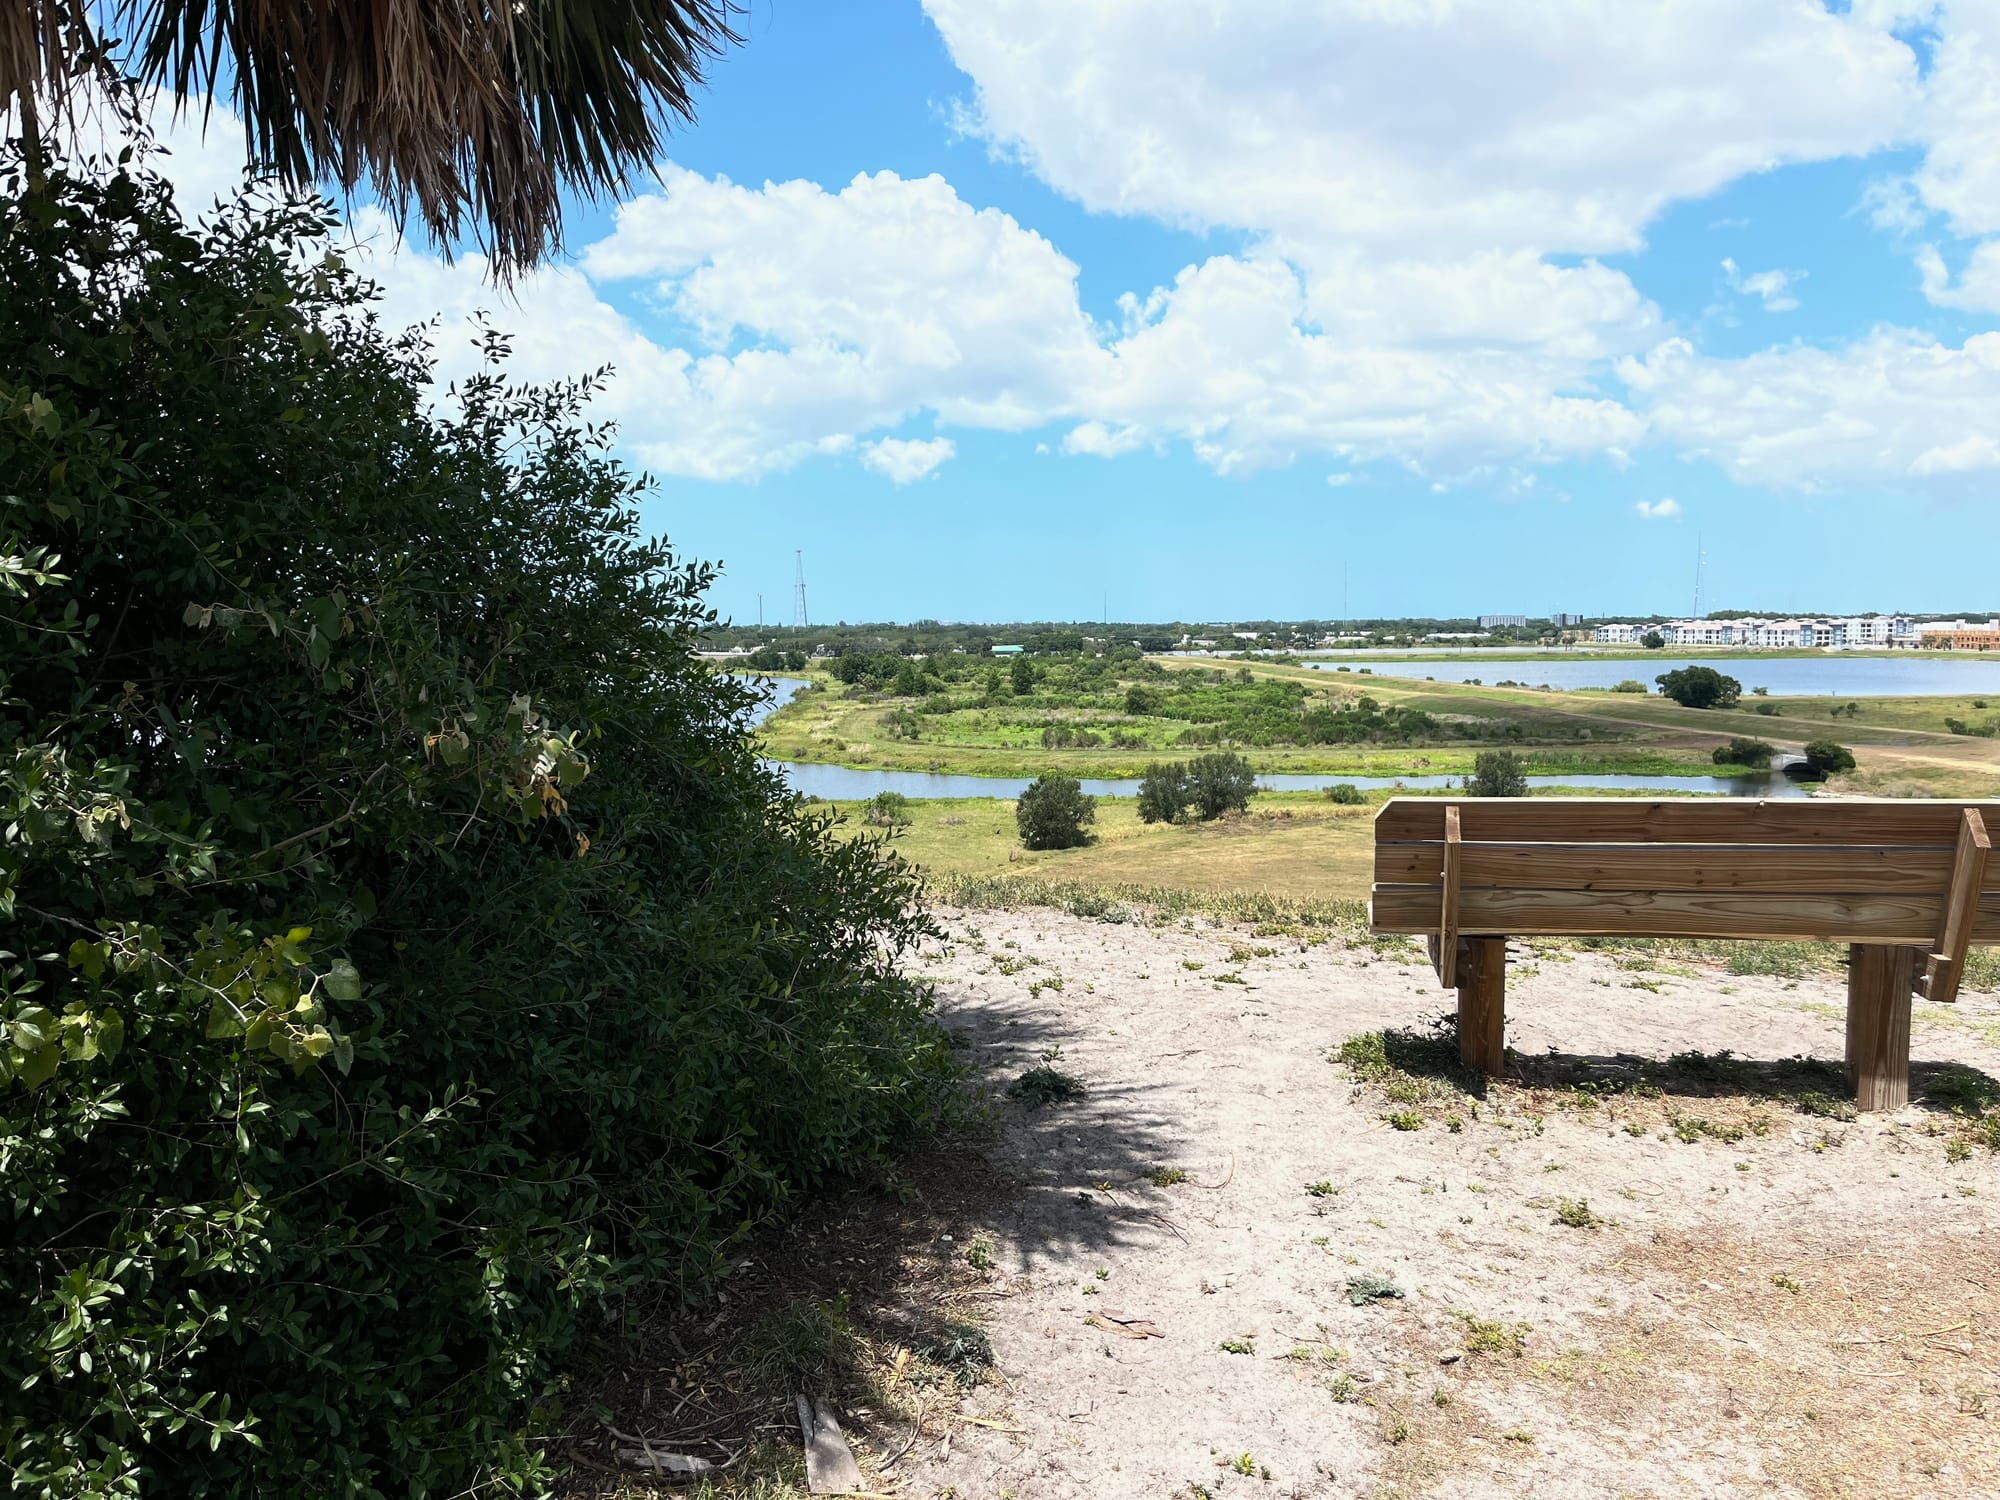 A bench at the Sarasota Celery Fields, overlooking a retention pond